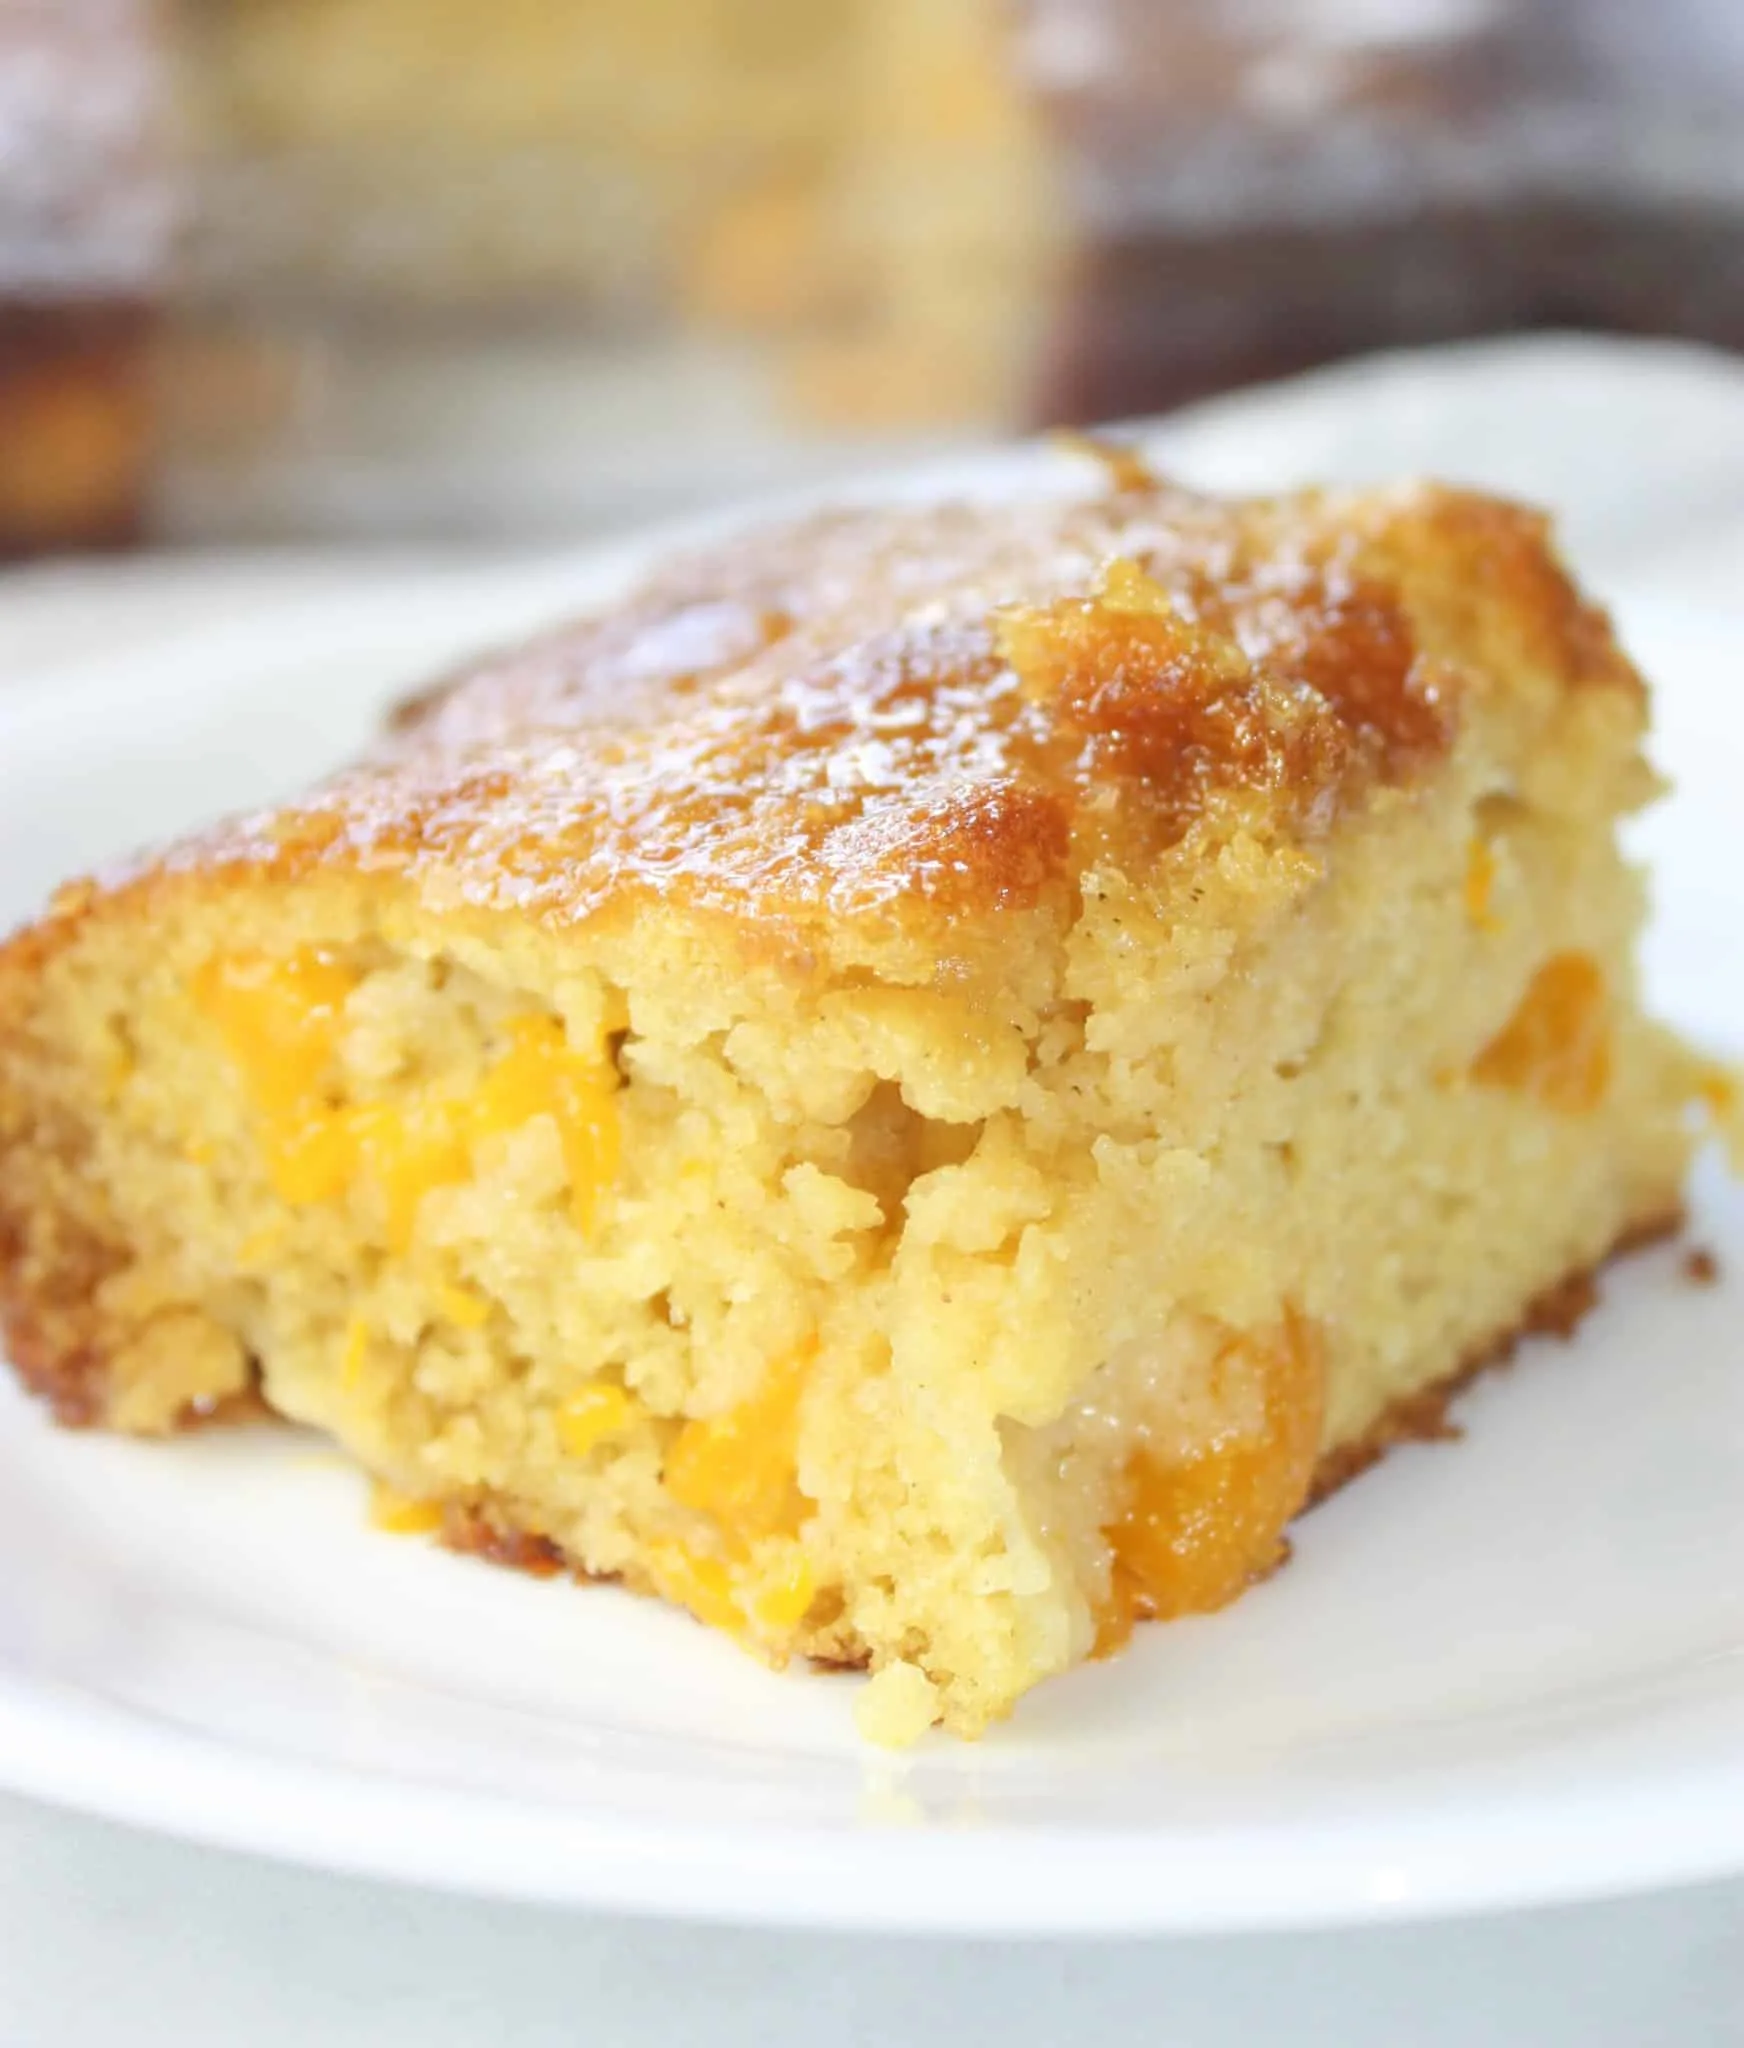 Gluten Free Mandarin Cake is a very quick and easy recipe to make. Loaded with mandarin oranges it is a nice burst of citrus any time of the year.